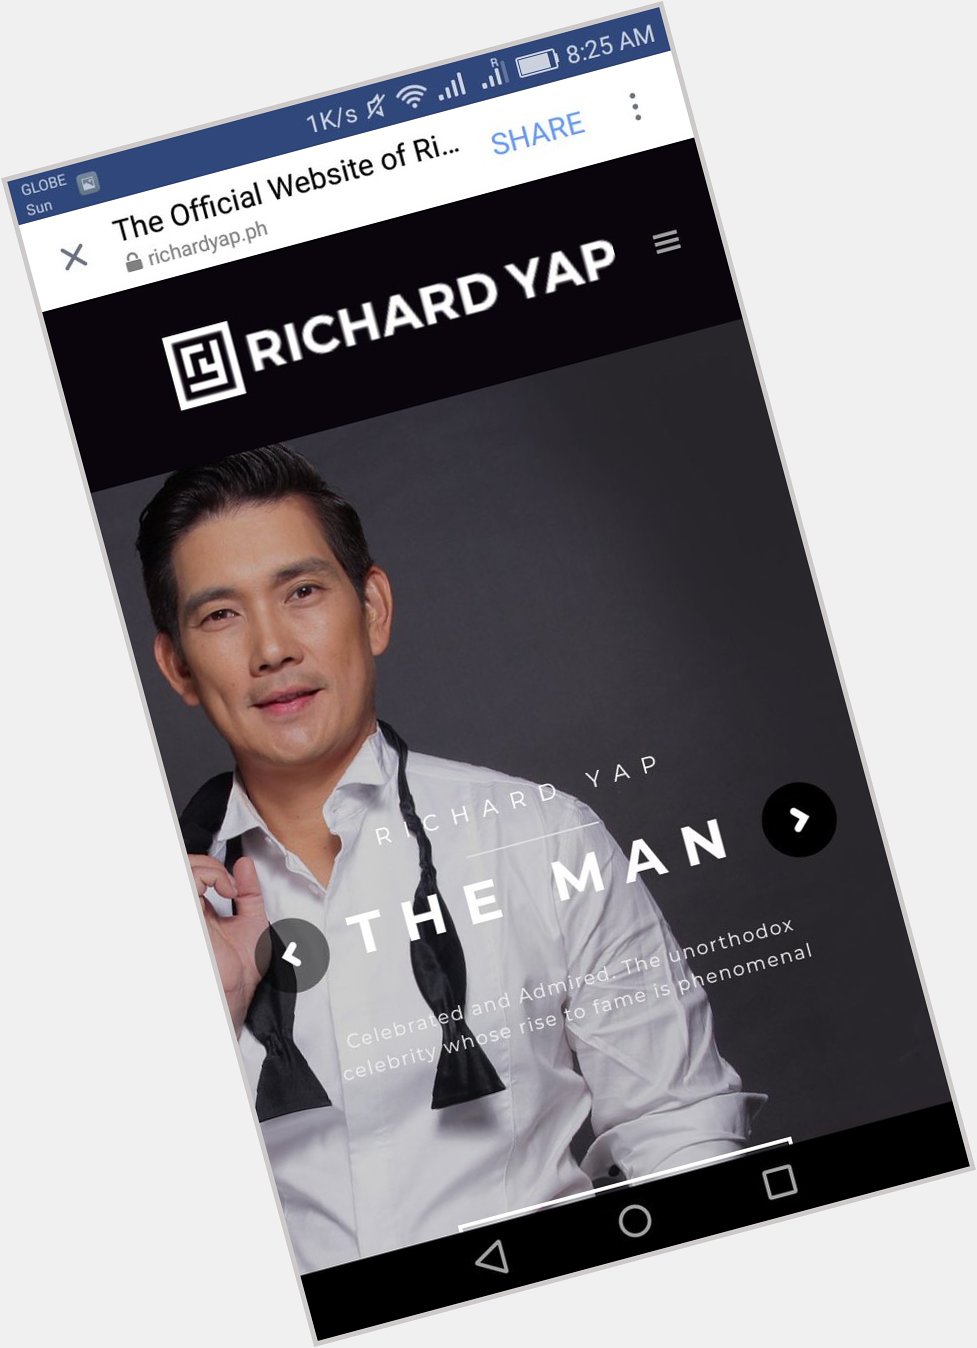  Happy Birthday Richard Yap!
Stay Healthy and God Bless!    